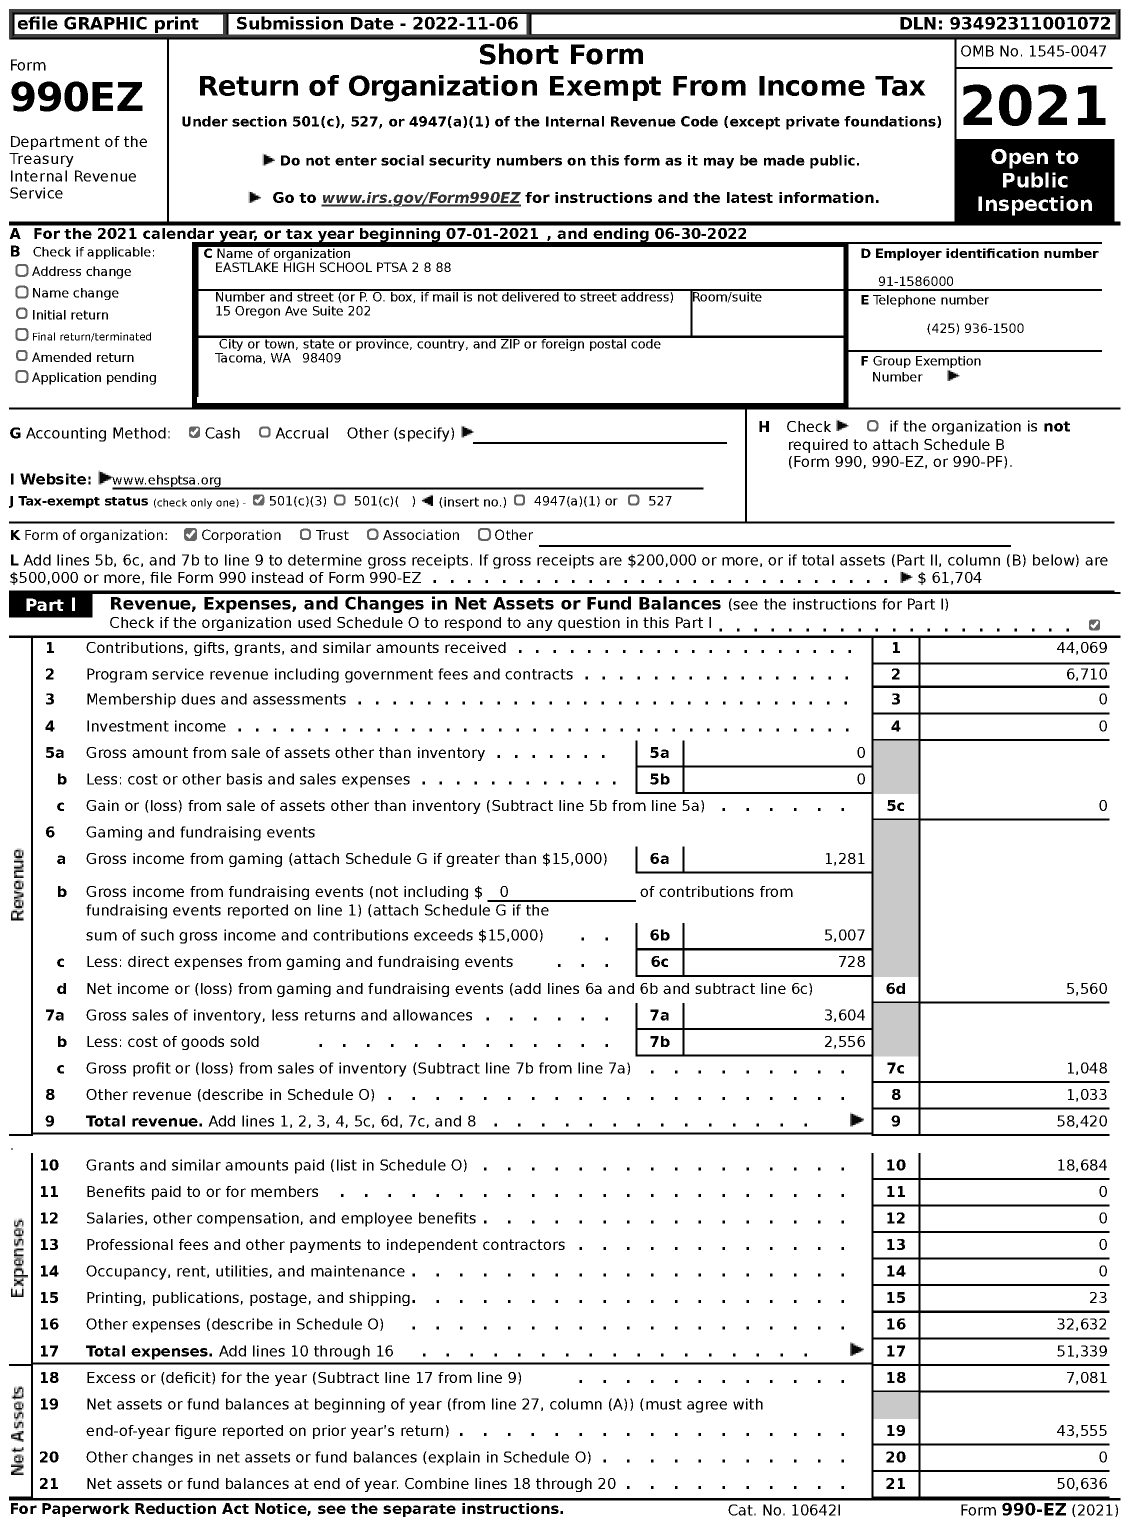 Image of first page of 2021 Form 990EZ for Eastlake High School Ptsa 2888 8 88